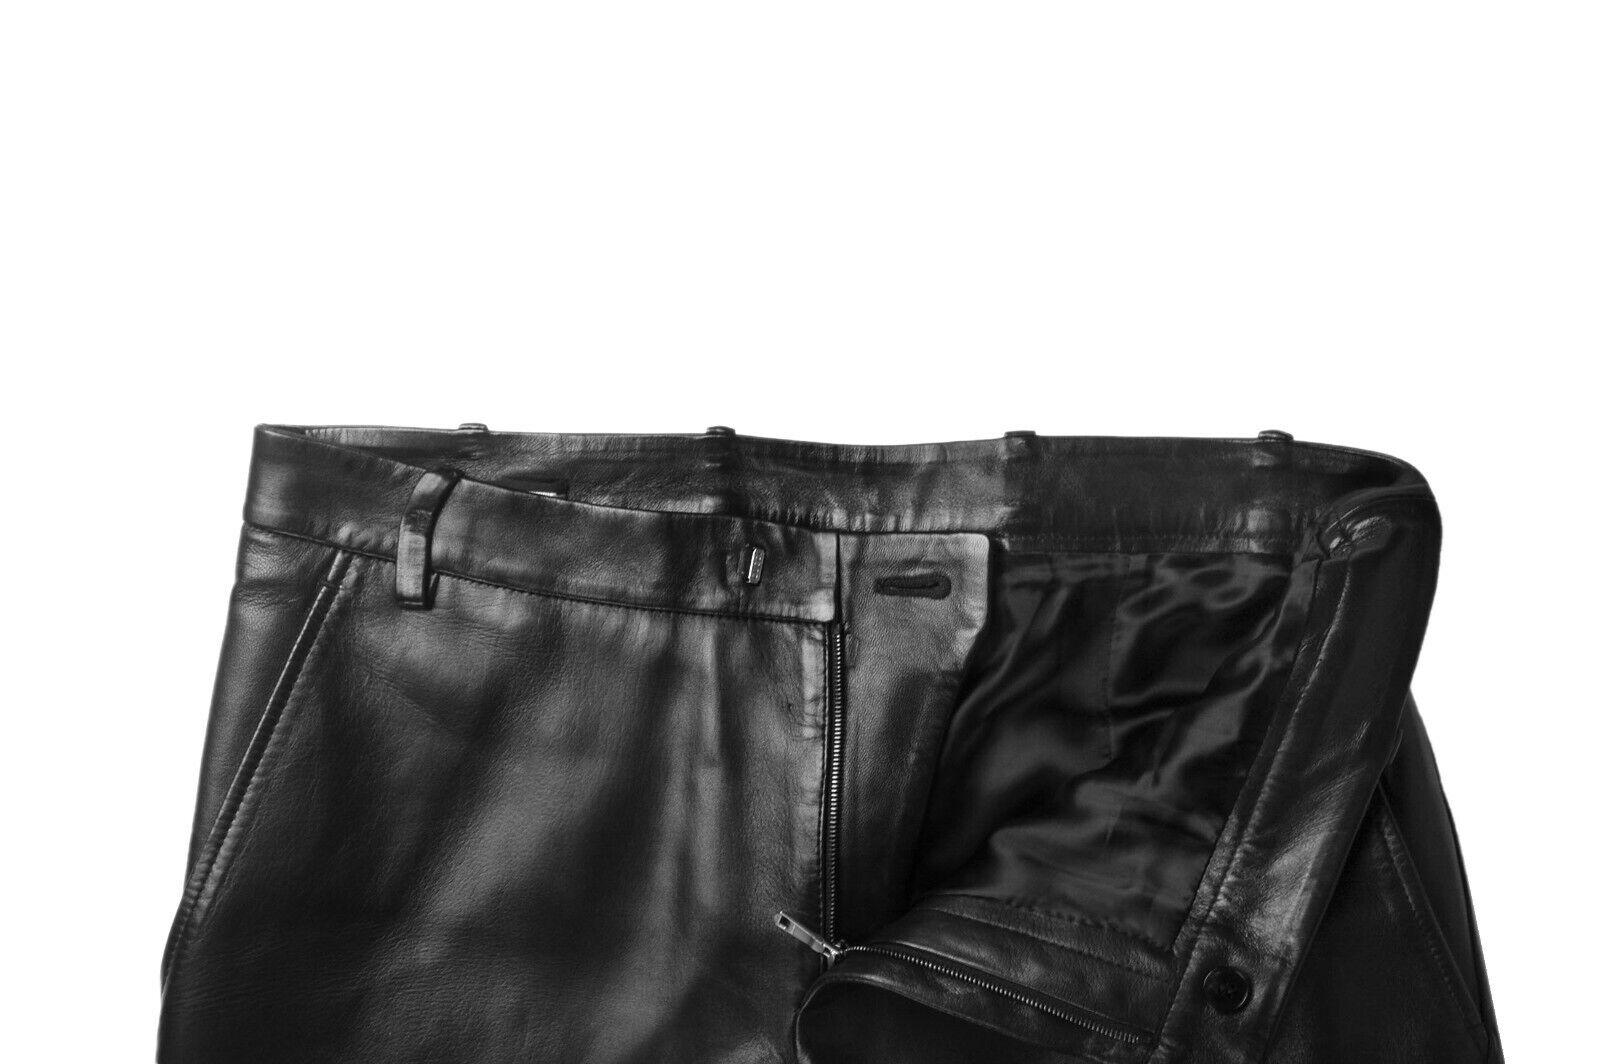 Item for sale is 100% genuine Gucci Leather Men Pants
Color: Black
(An actual color may a bit vary due to individual computer screen interpretation)
Material: 100% genuine leather
Tag size: 48IT(W32)
These pants are great quality item. Rate 9 of 10,